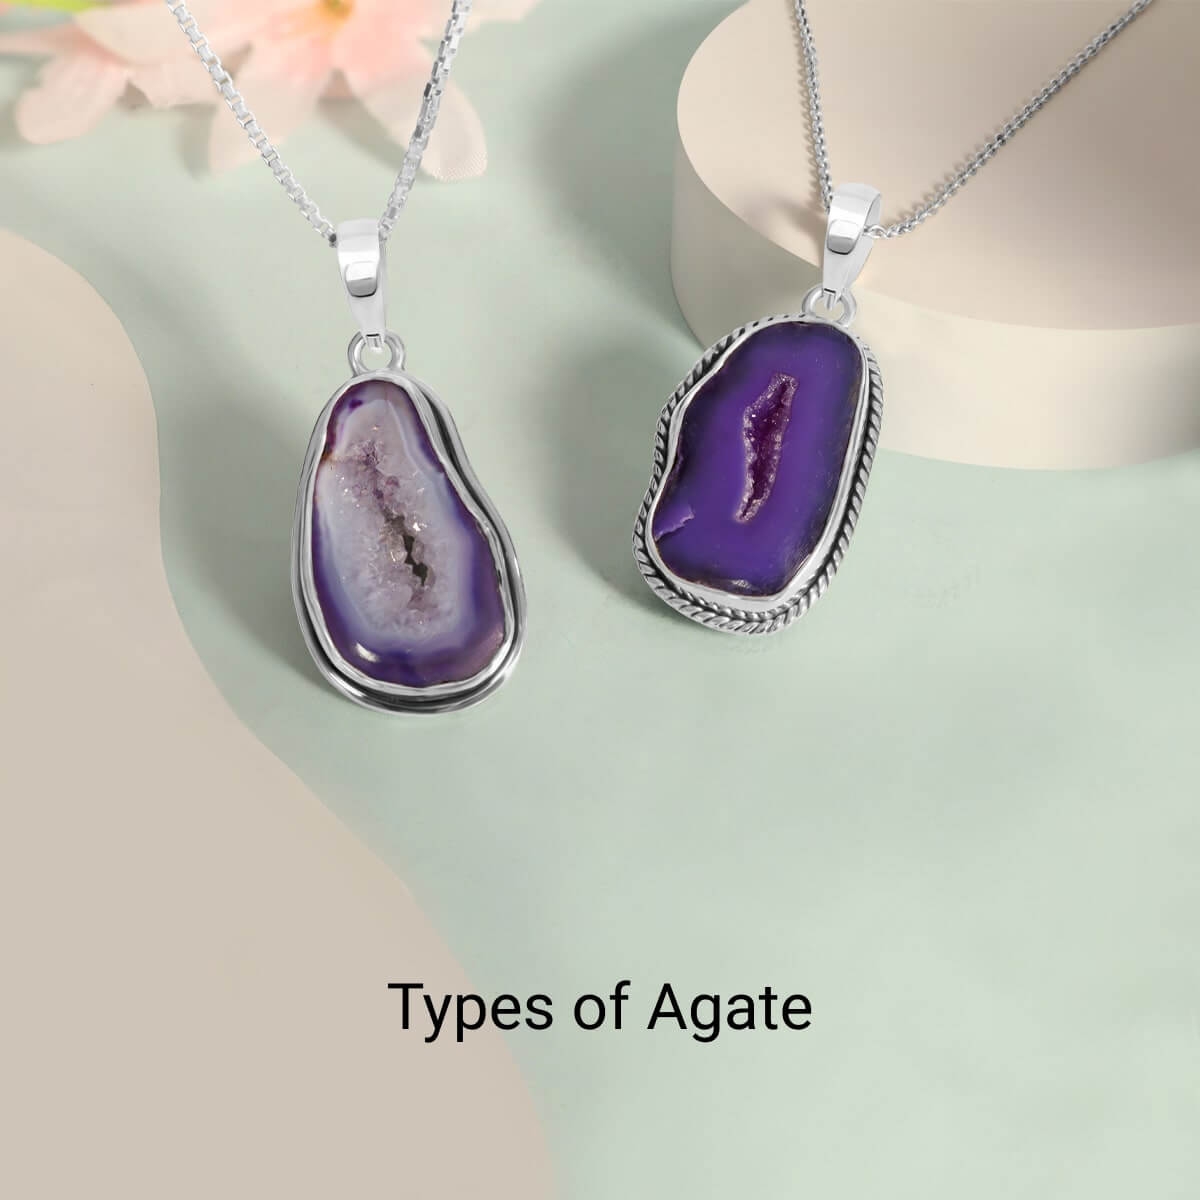 Agate: Types